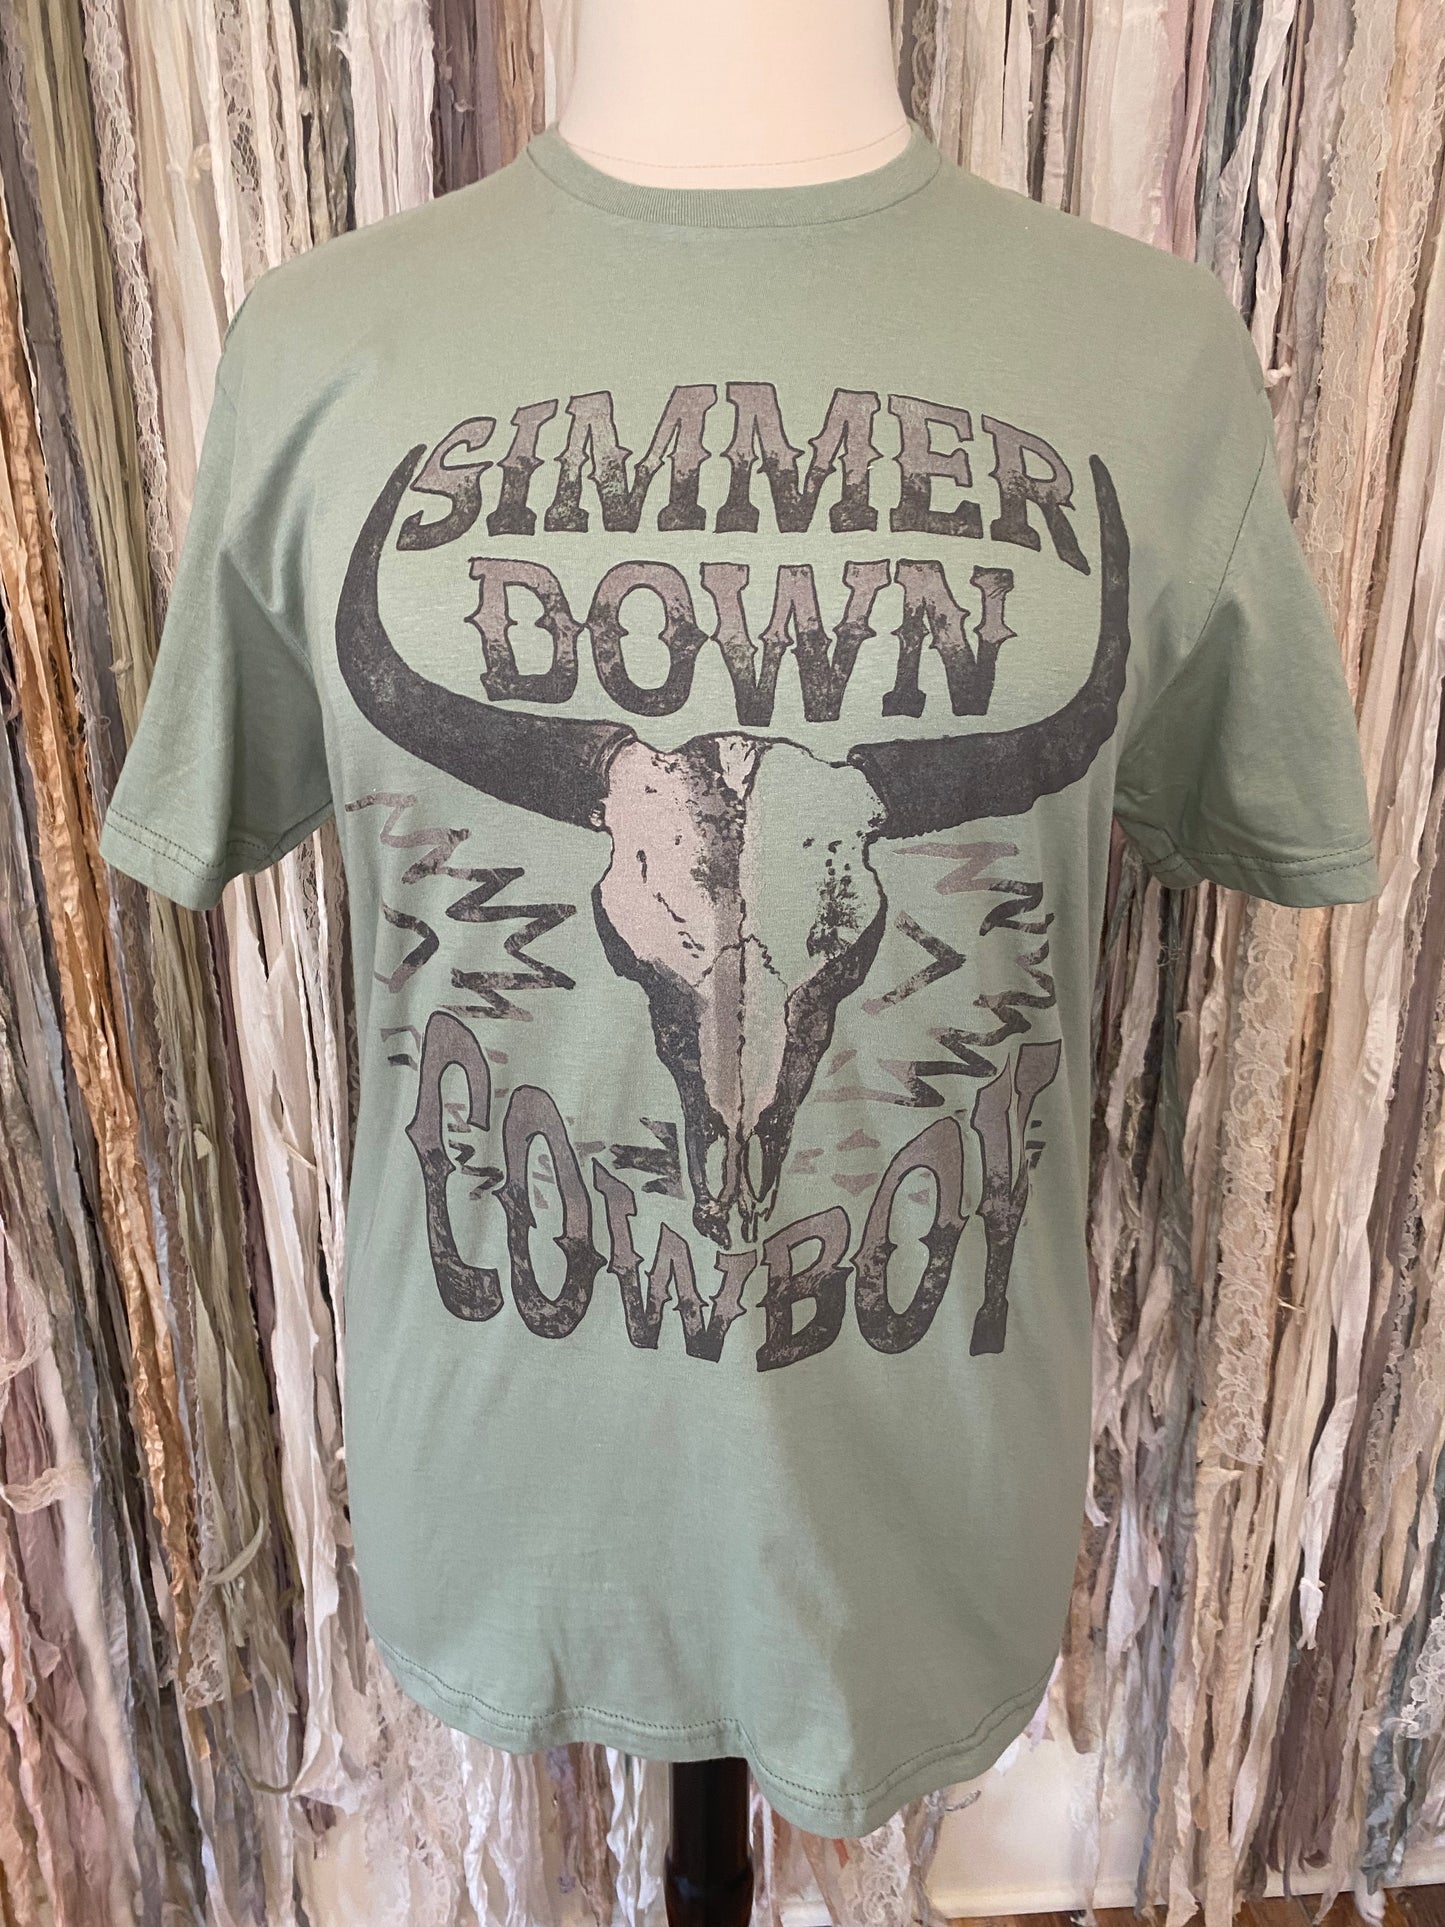 Made To Order Line - T-Shirt with Simmer Down Cowboy Written on it